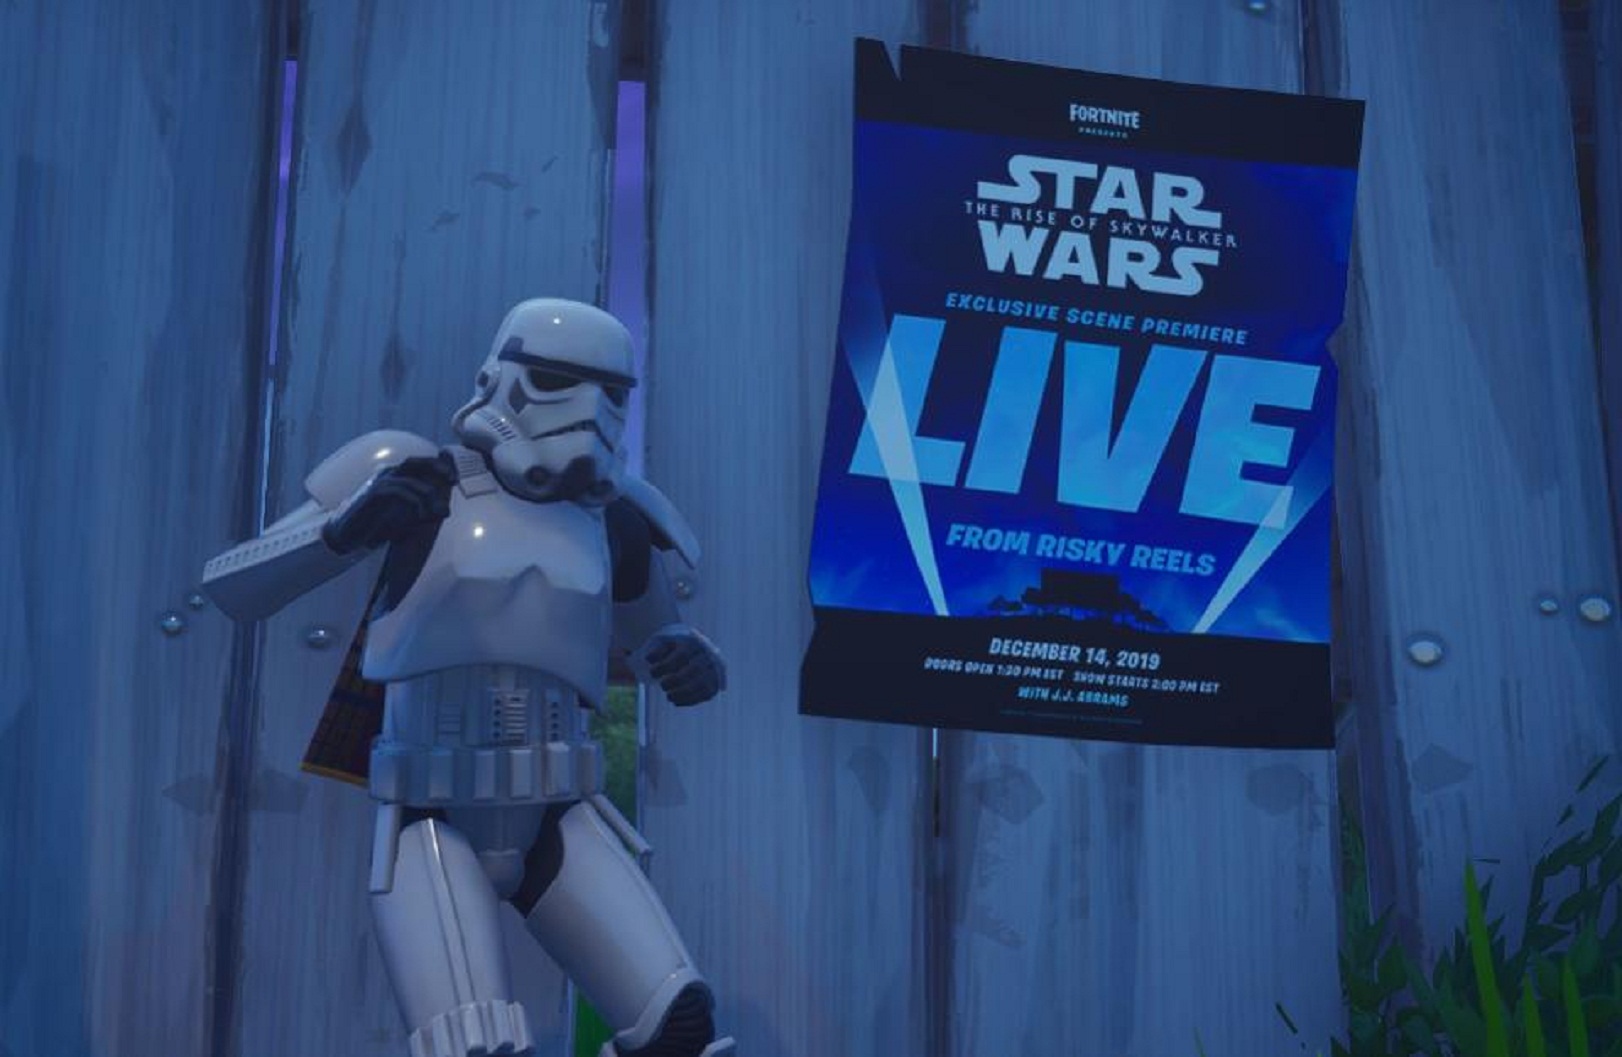 Fortnite Teases ‘An Exclusive Scene From Star Wars: The Rise Of Skywalker’ Which Will Premiere In-Game This December